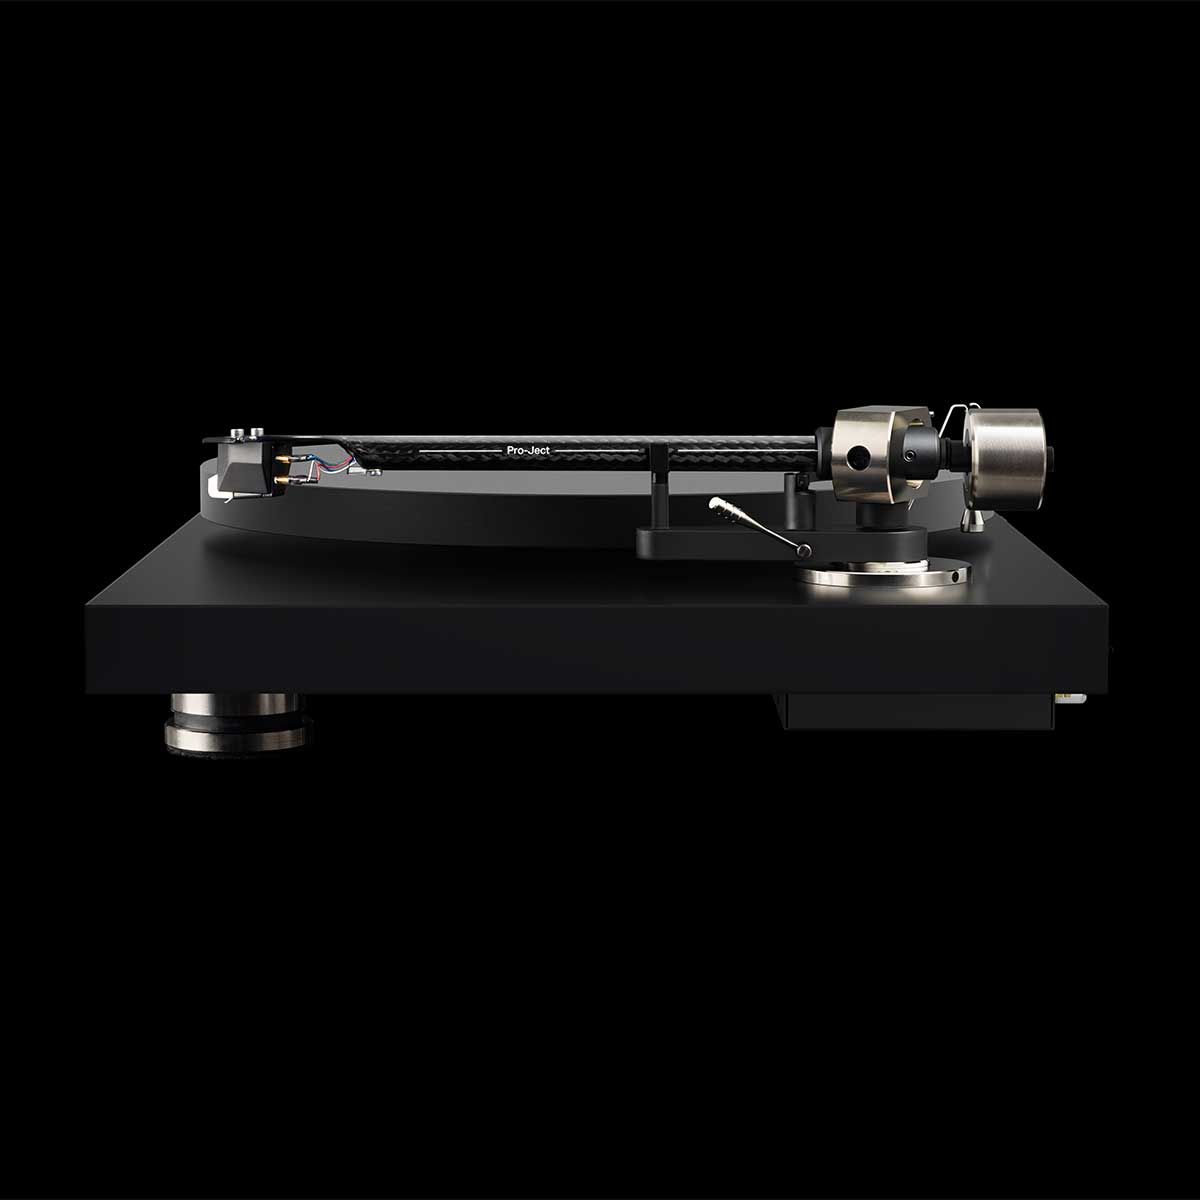 Pro-Ject Debut PRO Turntable, Satin Black, side view on black background